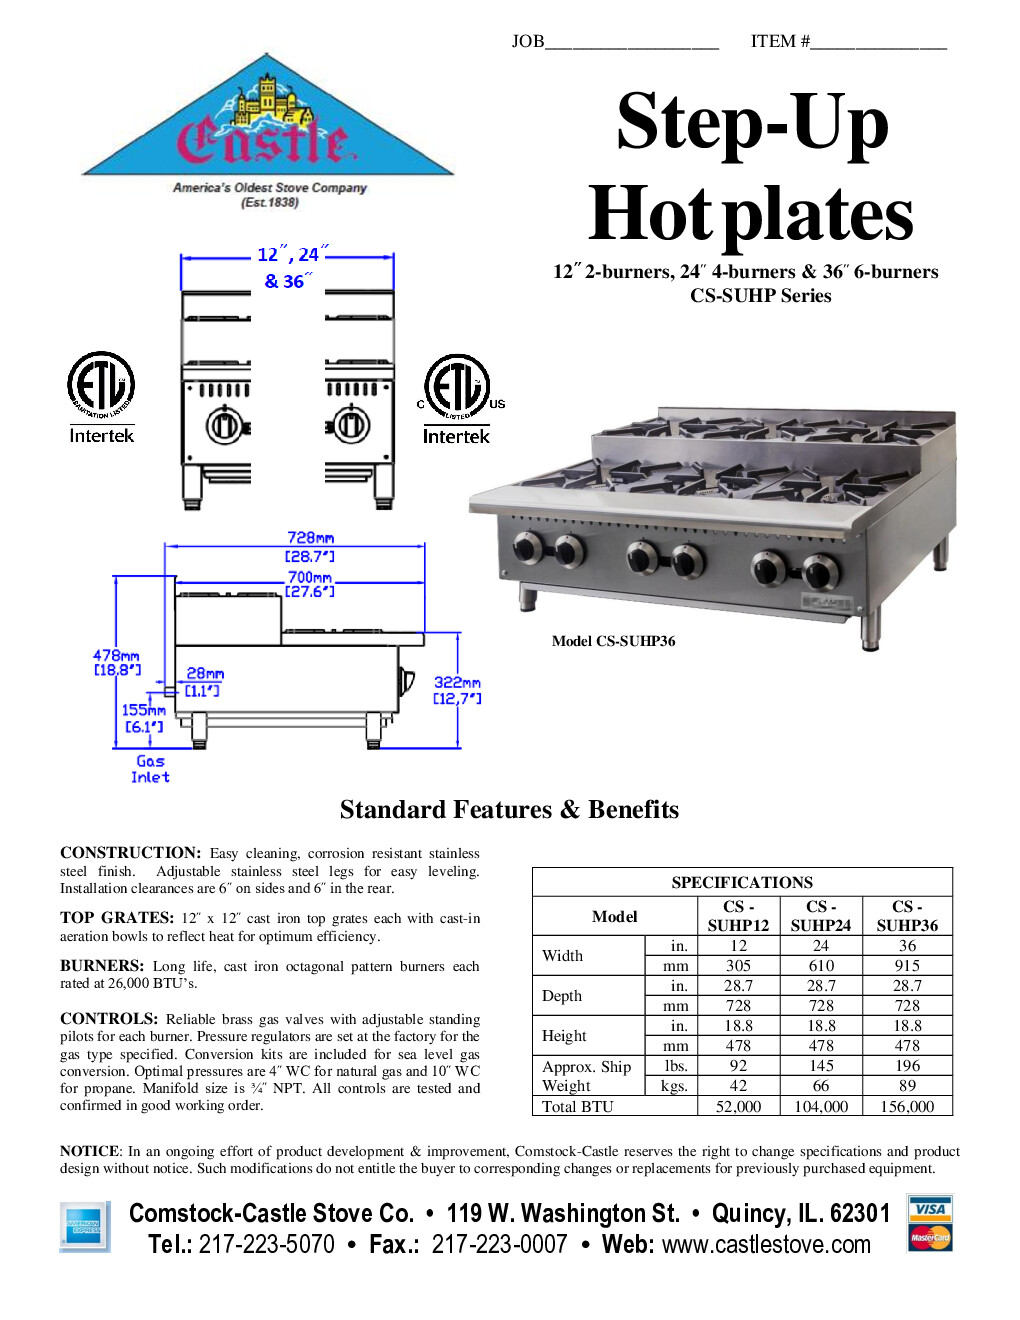 Comstock-Castle CSSUHP36 Countertop Gas Griddle / Hotplate